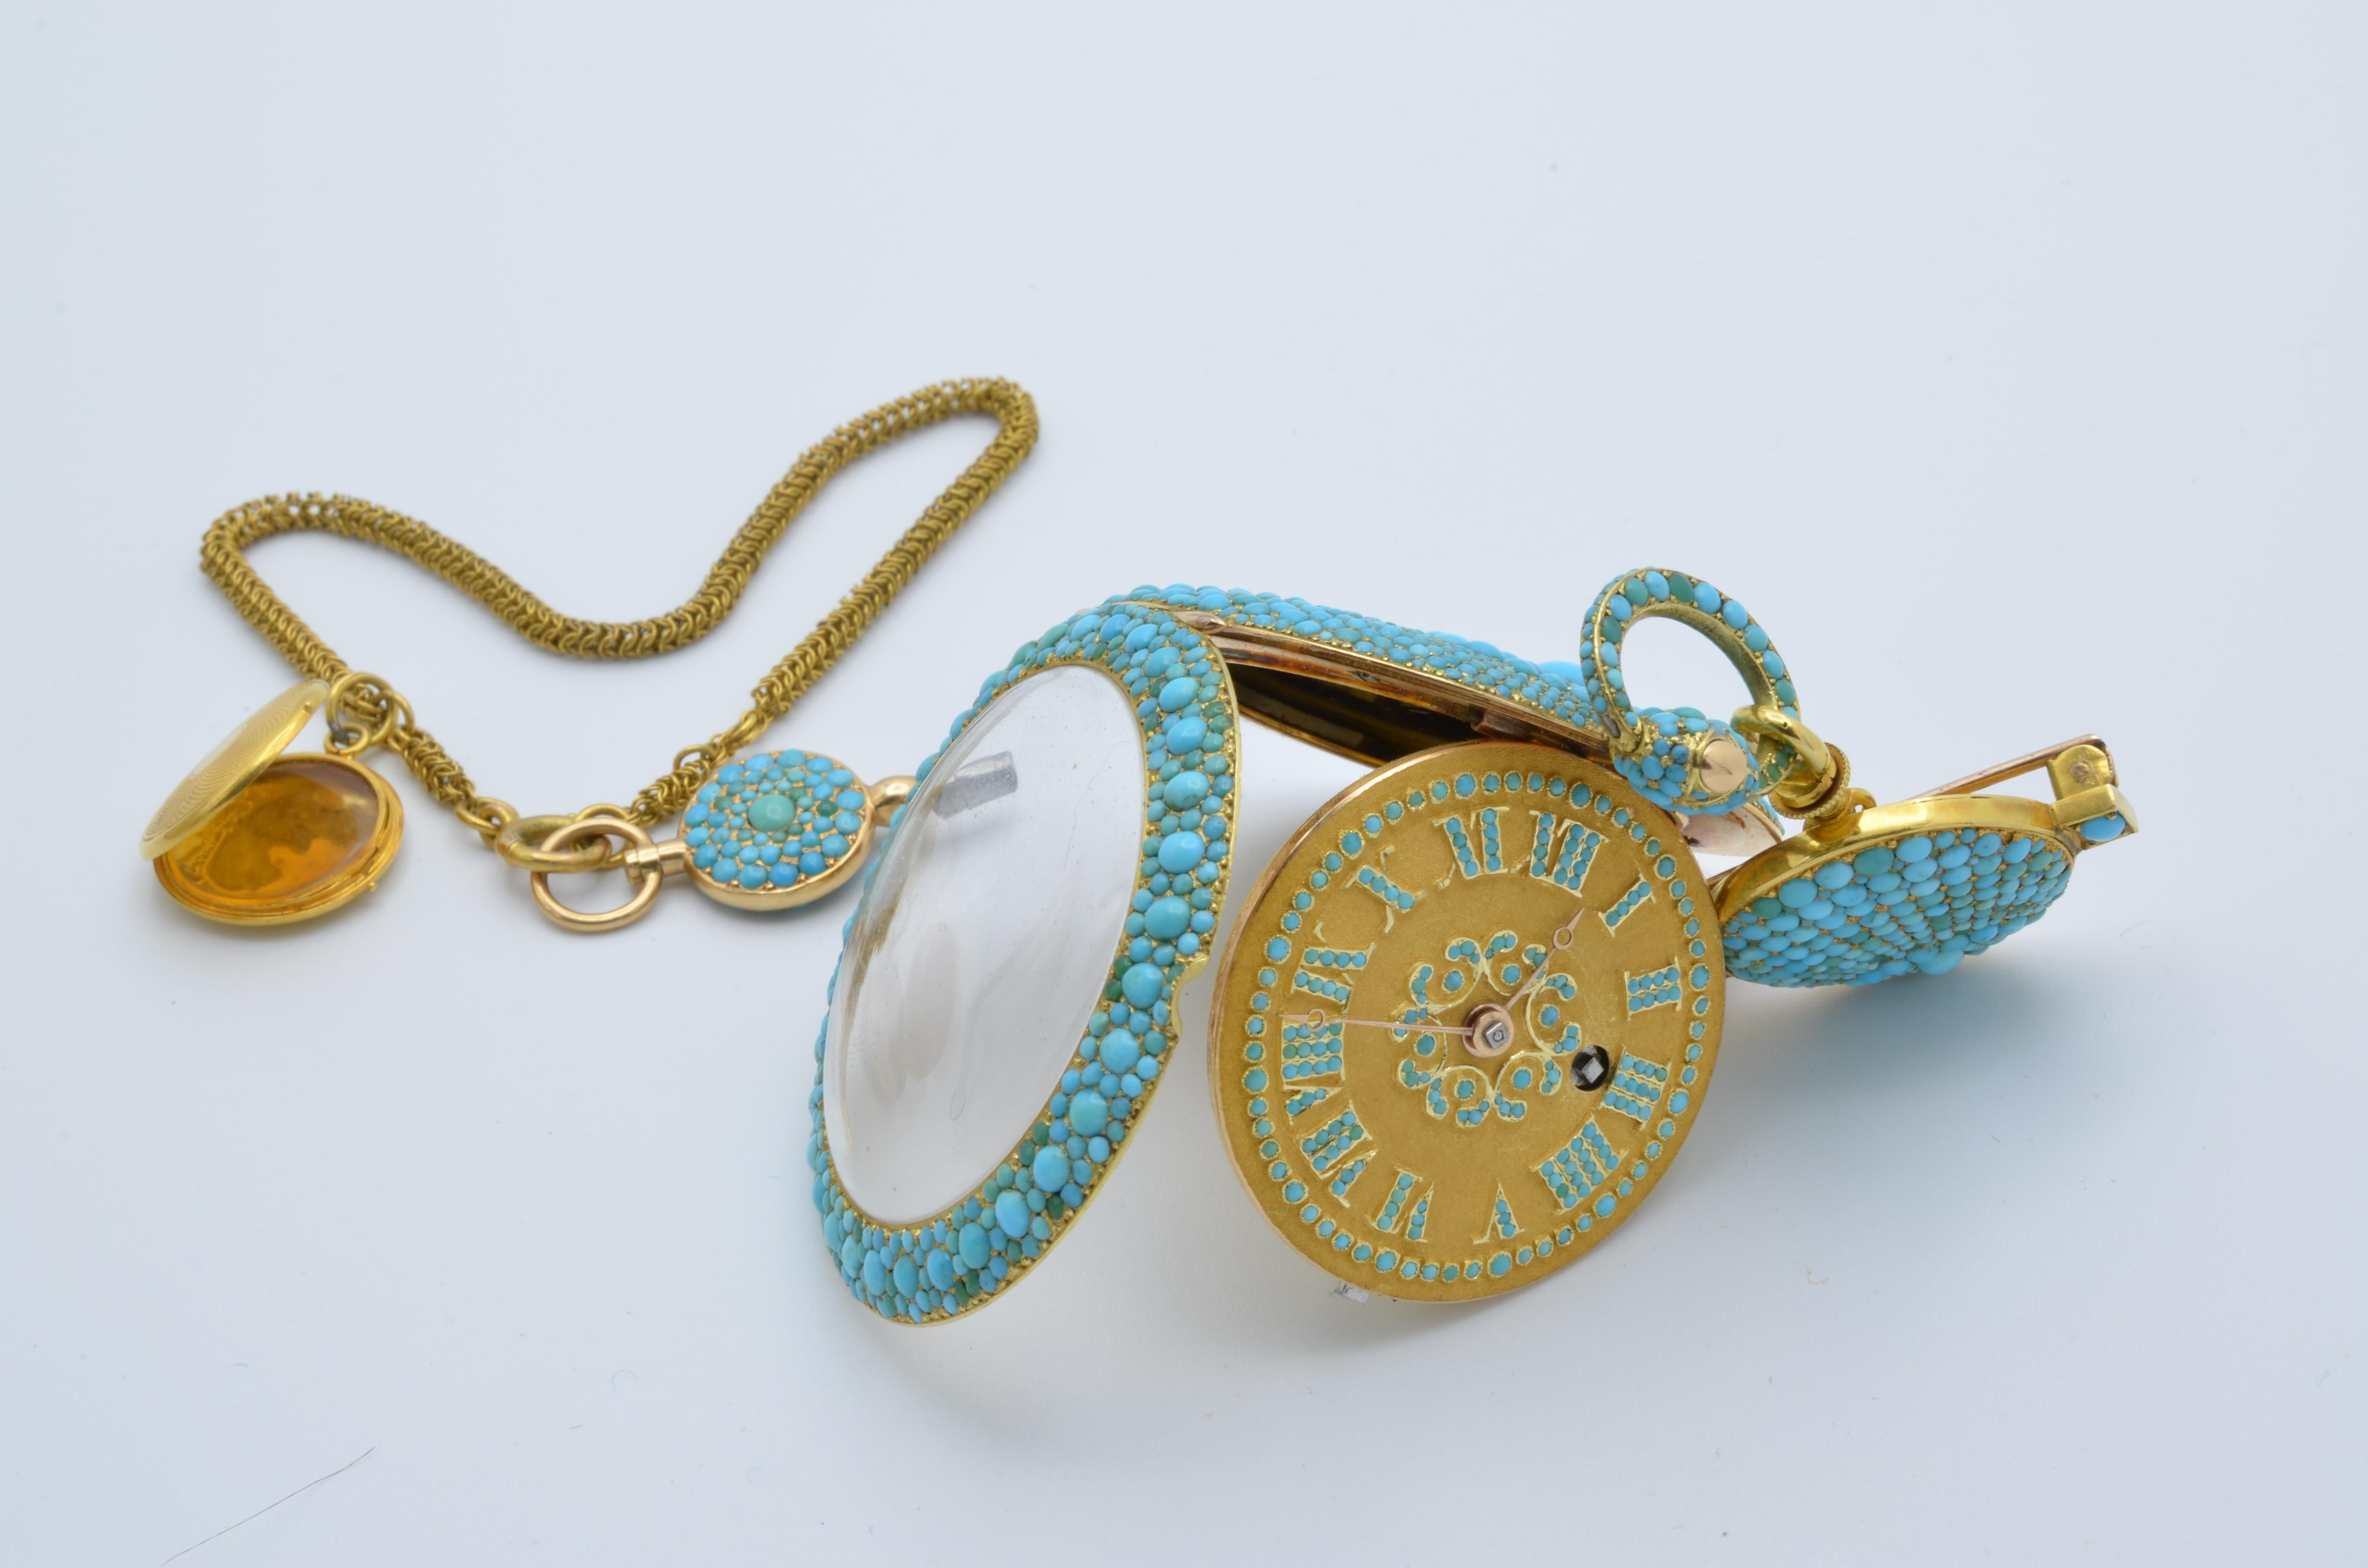 1830 Turquoise Lapel Gold Pocket Watch Bautte and Co with Chain and Locket 4